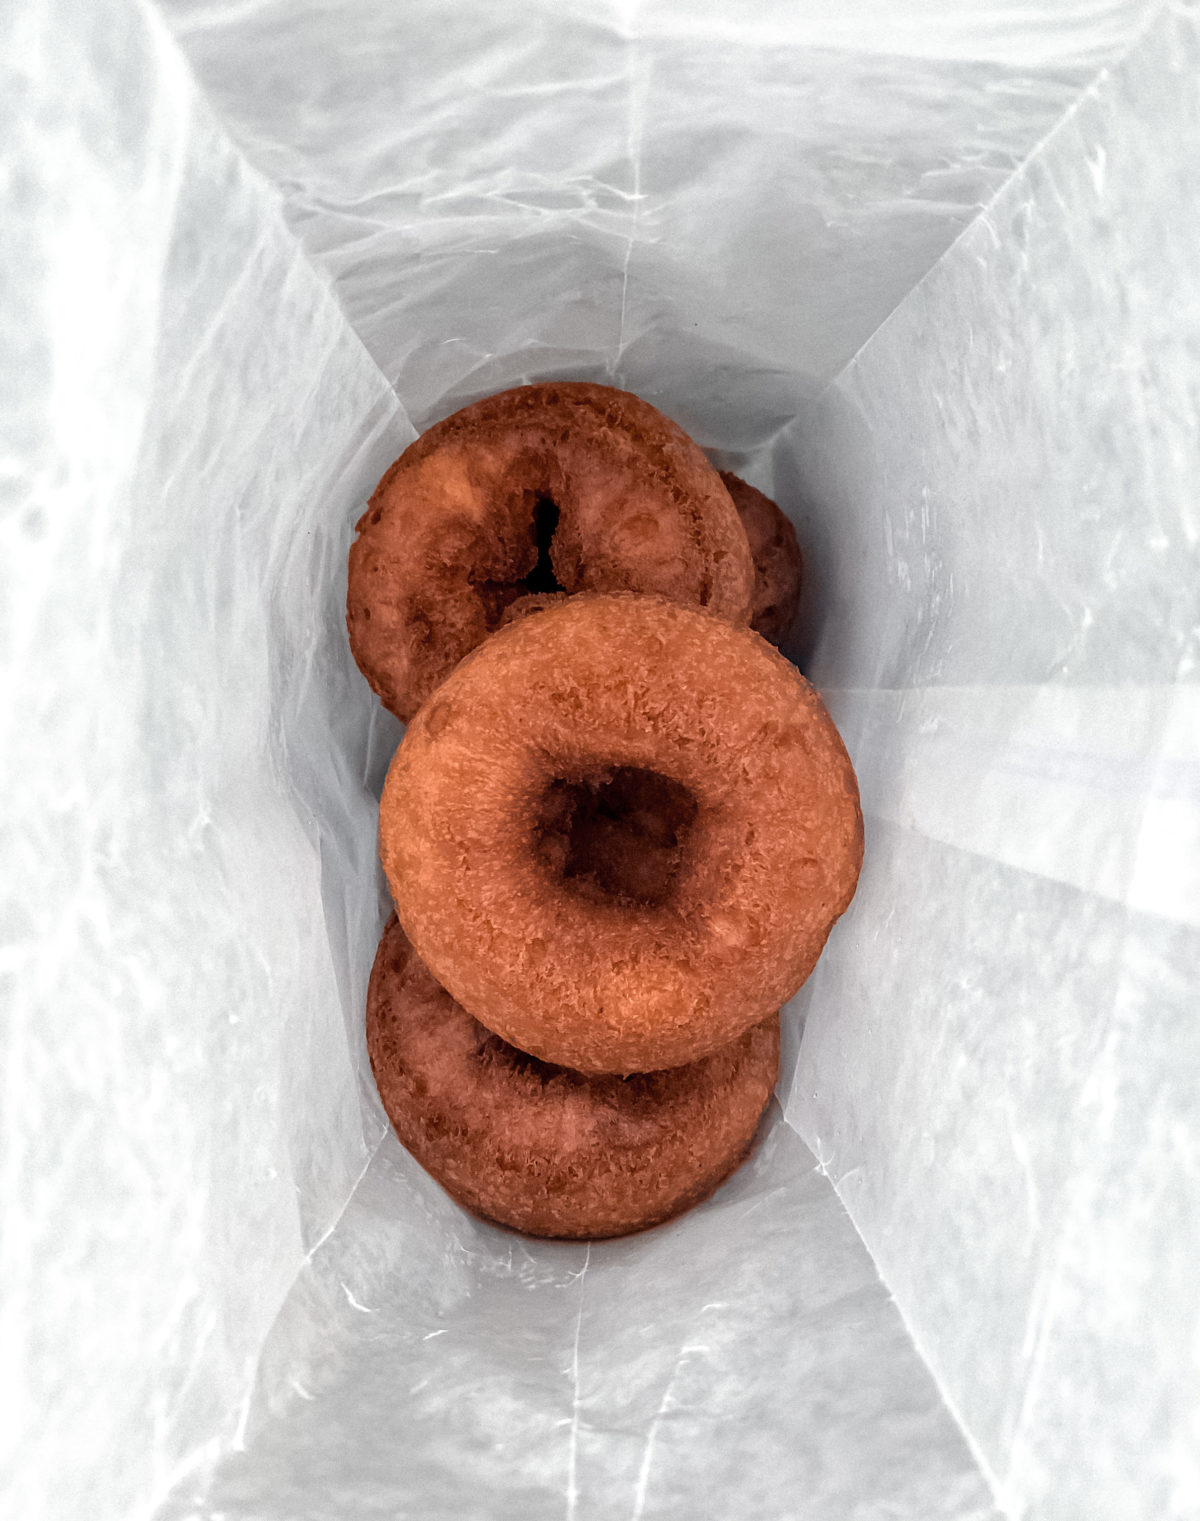 Uncoated doughnuts in bag